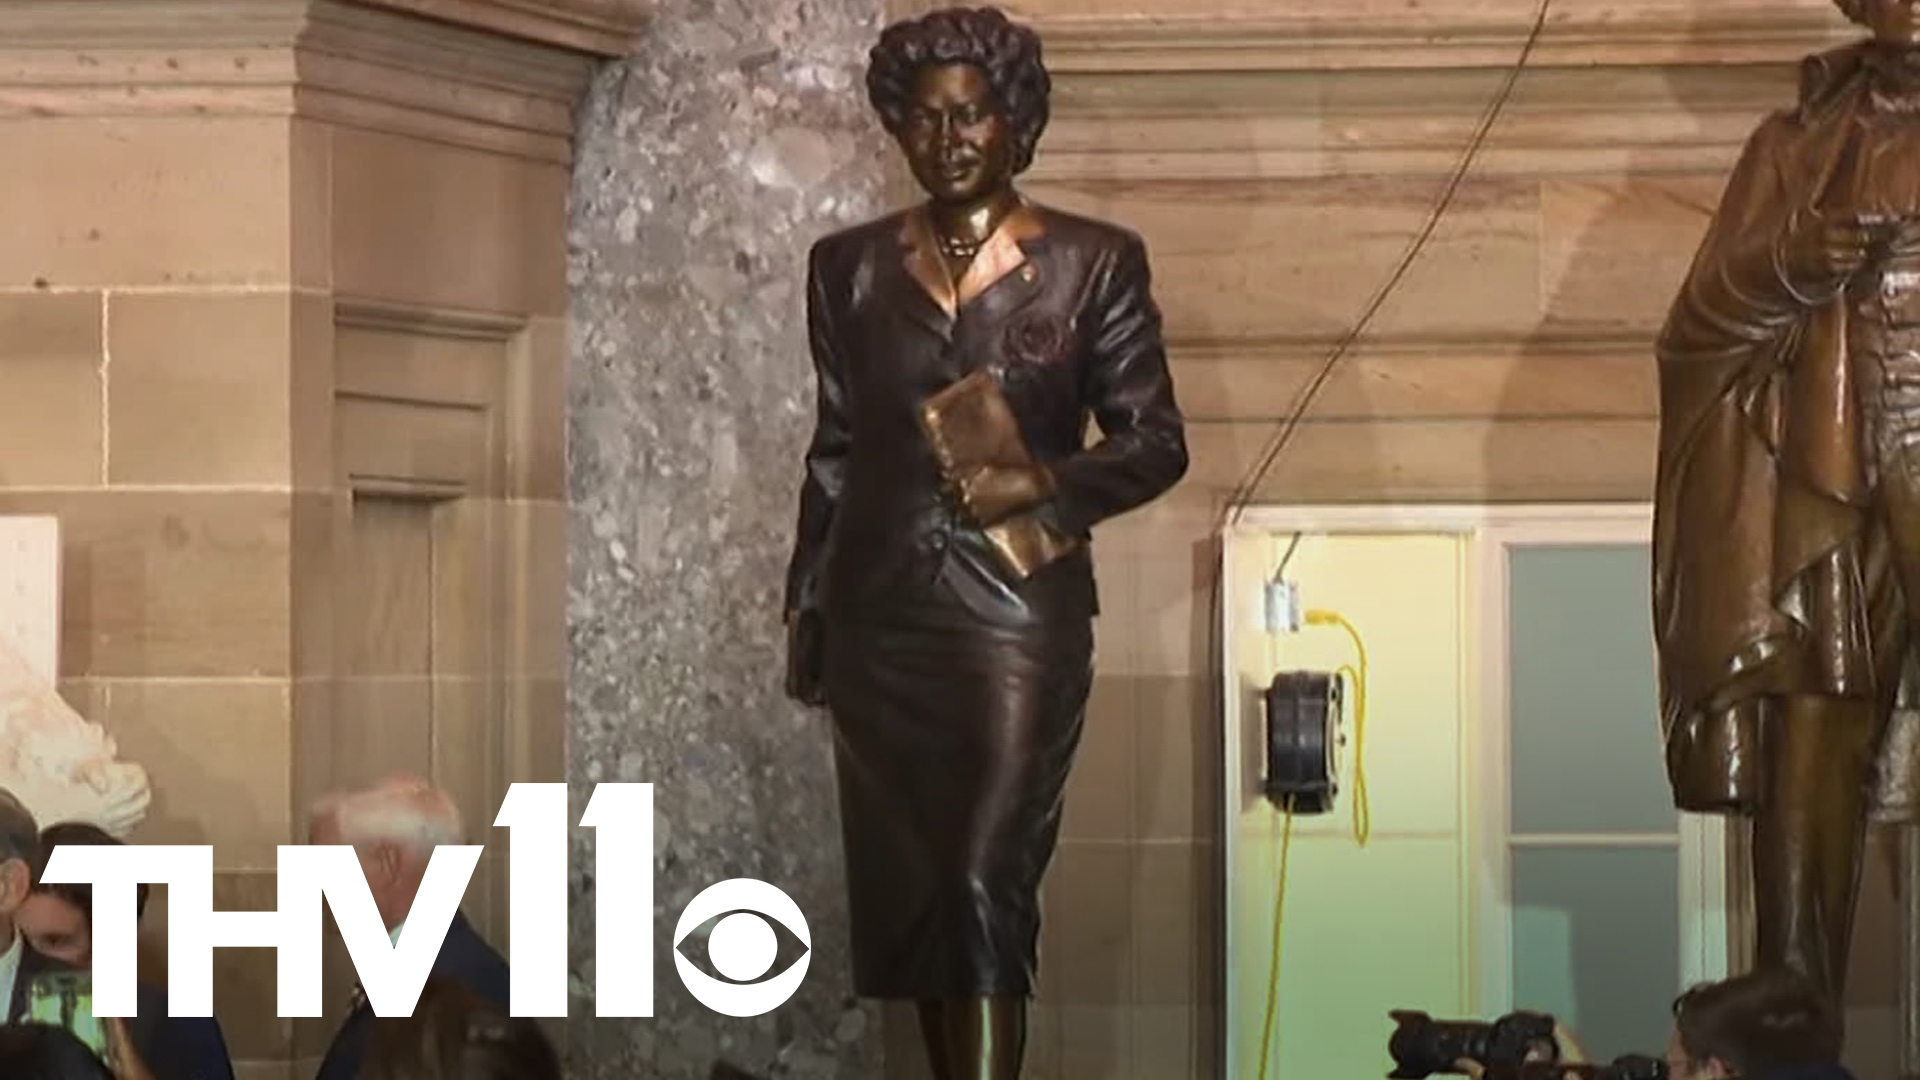 Daisy Bates, a civil rights leader who helped the Little Rock Nine during desegregation efforts, was honored with a statue at the U.S. Capitol.